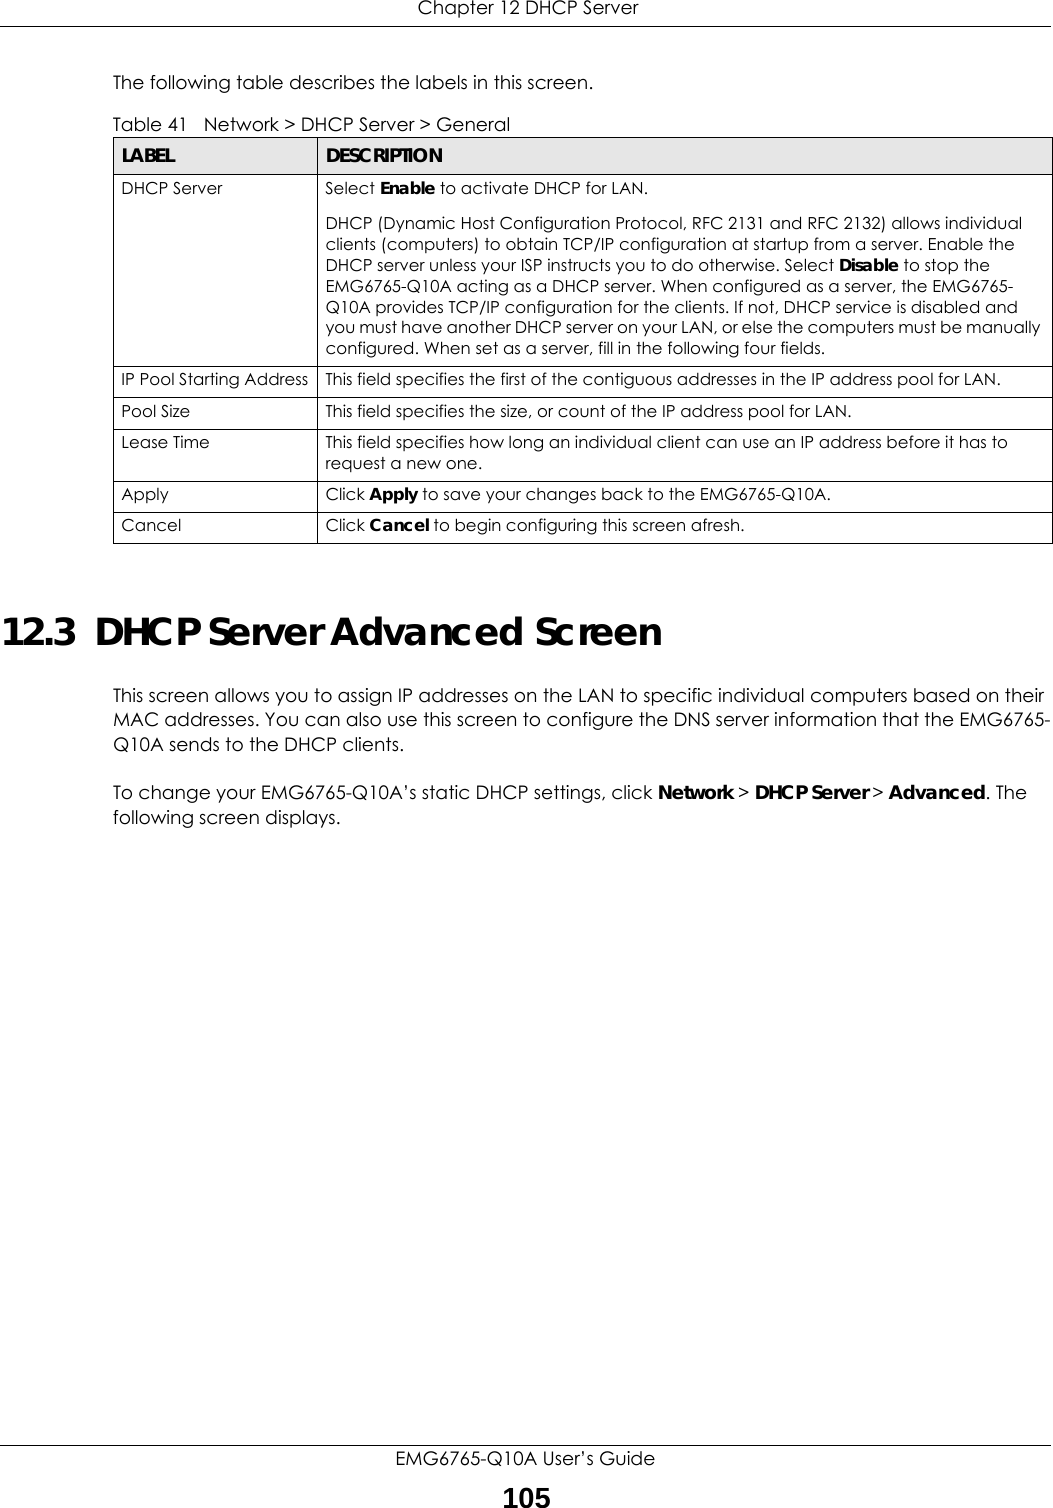  Chapter 12 DHCP ServerEMG6765-Q10A User’s Guide105The following table describes the labels in this screen.12.3  DHCP Server Advanced Screen    This screen allows you to assign IP addresses on the LAN to specific individual computers based on their MAC addresses. You can also use this screen to configure the DNS server information that the EMG6765-Q10A sends to the DHCP clients.To change your EMG6765-Q10A’s static DHCP settings, click Network &gt; DHCP Server &gt; Advanced. The following screen displays.Table 41   Network &gt; DHCP Server &gt; General  LABEL DESCRIPTIONDHCP Server Select Enable to activate DHCP for LAN.DHCP (Dynamic Host Configuration Protocol, RFC 2131 and RFC 2132) allows individual clients (computers) to obtain TCP/IP configuration at startup from a server. Enable the DHCP server unless your ISP instructs you to do otherwise. Select Disable to stop the EMG6765-Q10A acting as a DHCP server. When configured as a server, the EMG6765-Q10A provides TCP/IP configuration for the clients. If not, DHCP service is disabled and you must have another DHCP server on your LAN, or else the computers must be manually configured. When set as a server, fill in the following four fields.IP Pool Starting Address This field specifies the first of the contiguous addresses in the IP address pool for LAN.Pool Size This field specifies the size, or count of the IP address pool for LAN.Lease Time This field specifies how long an individual client can use an IP address before it has to request a new one. Apply Click Apply to save your changes back to the EMG6765-Q10A.Cancel Click Cancel to begin configuring this screen afresh.